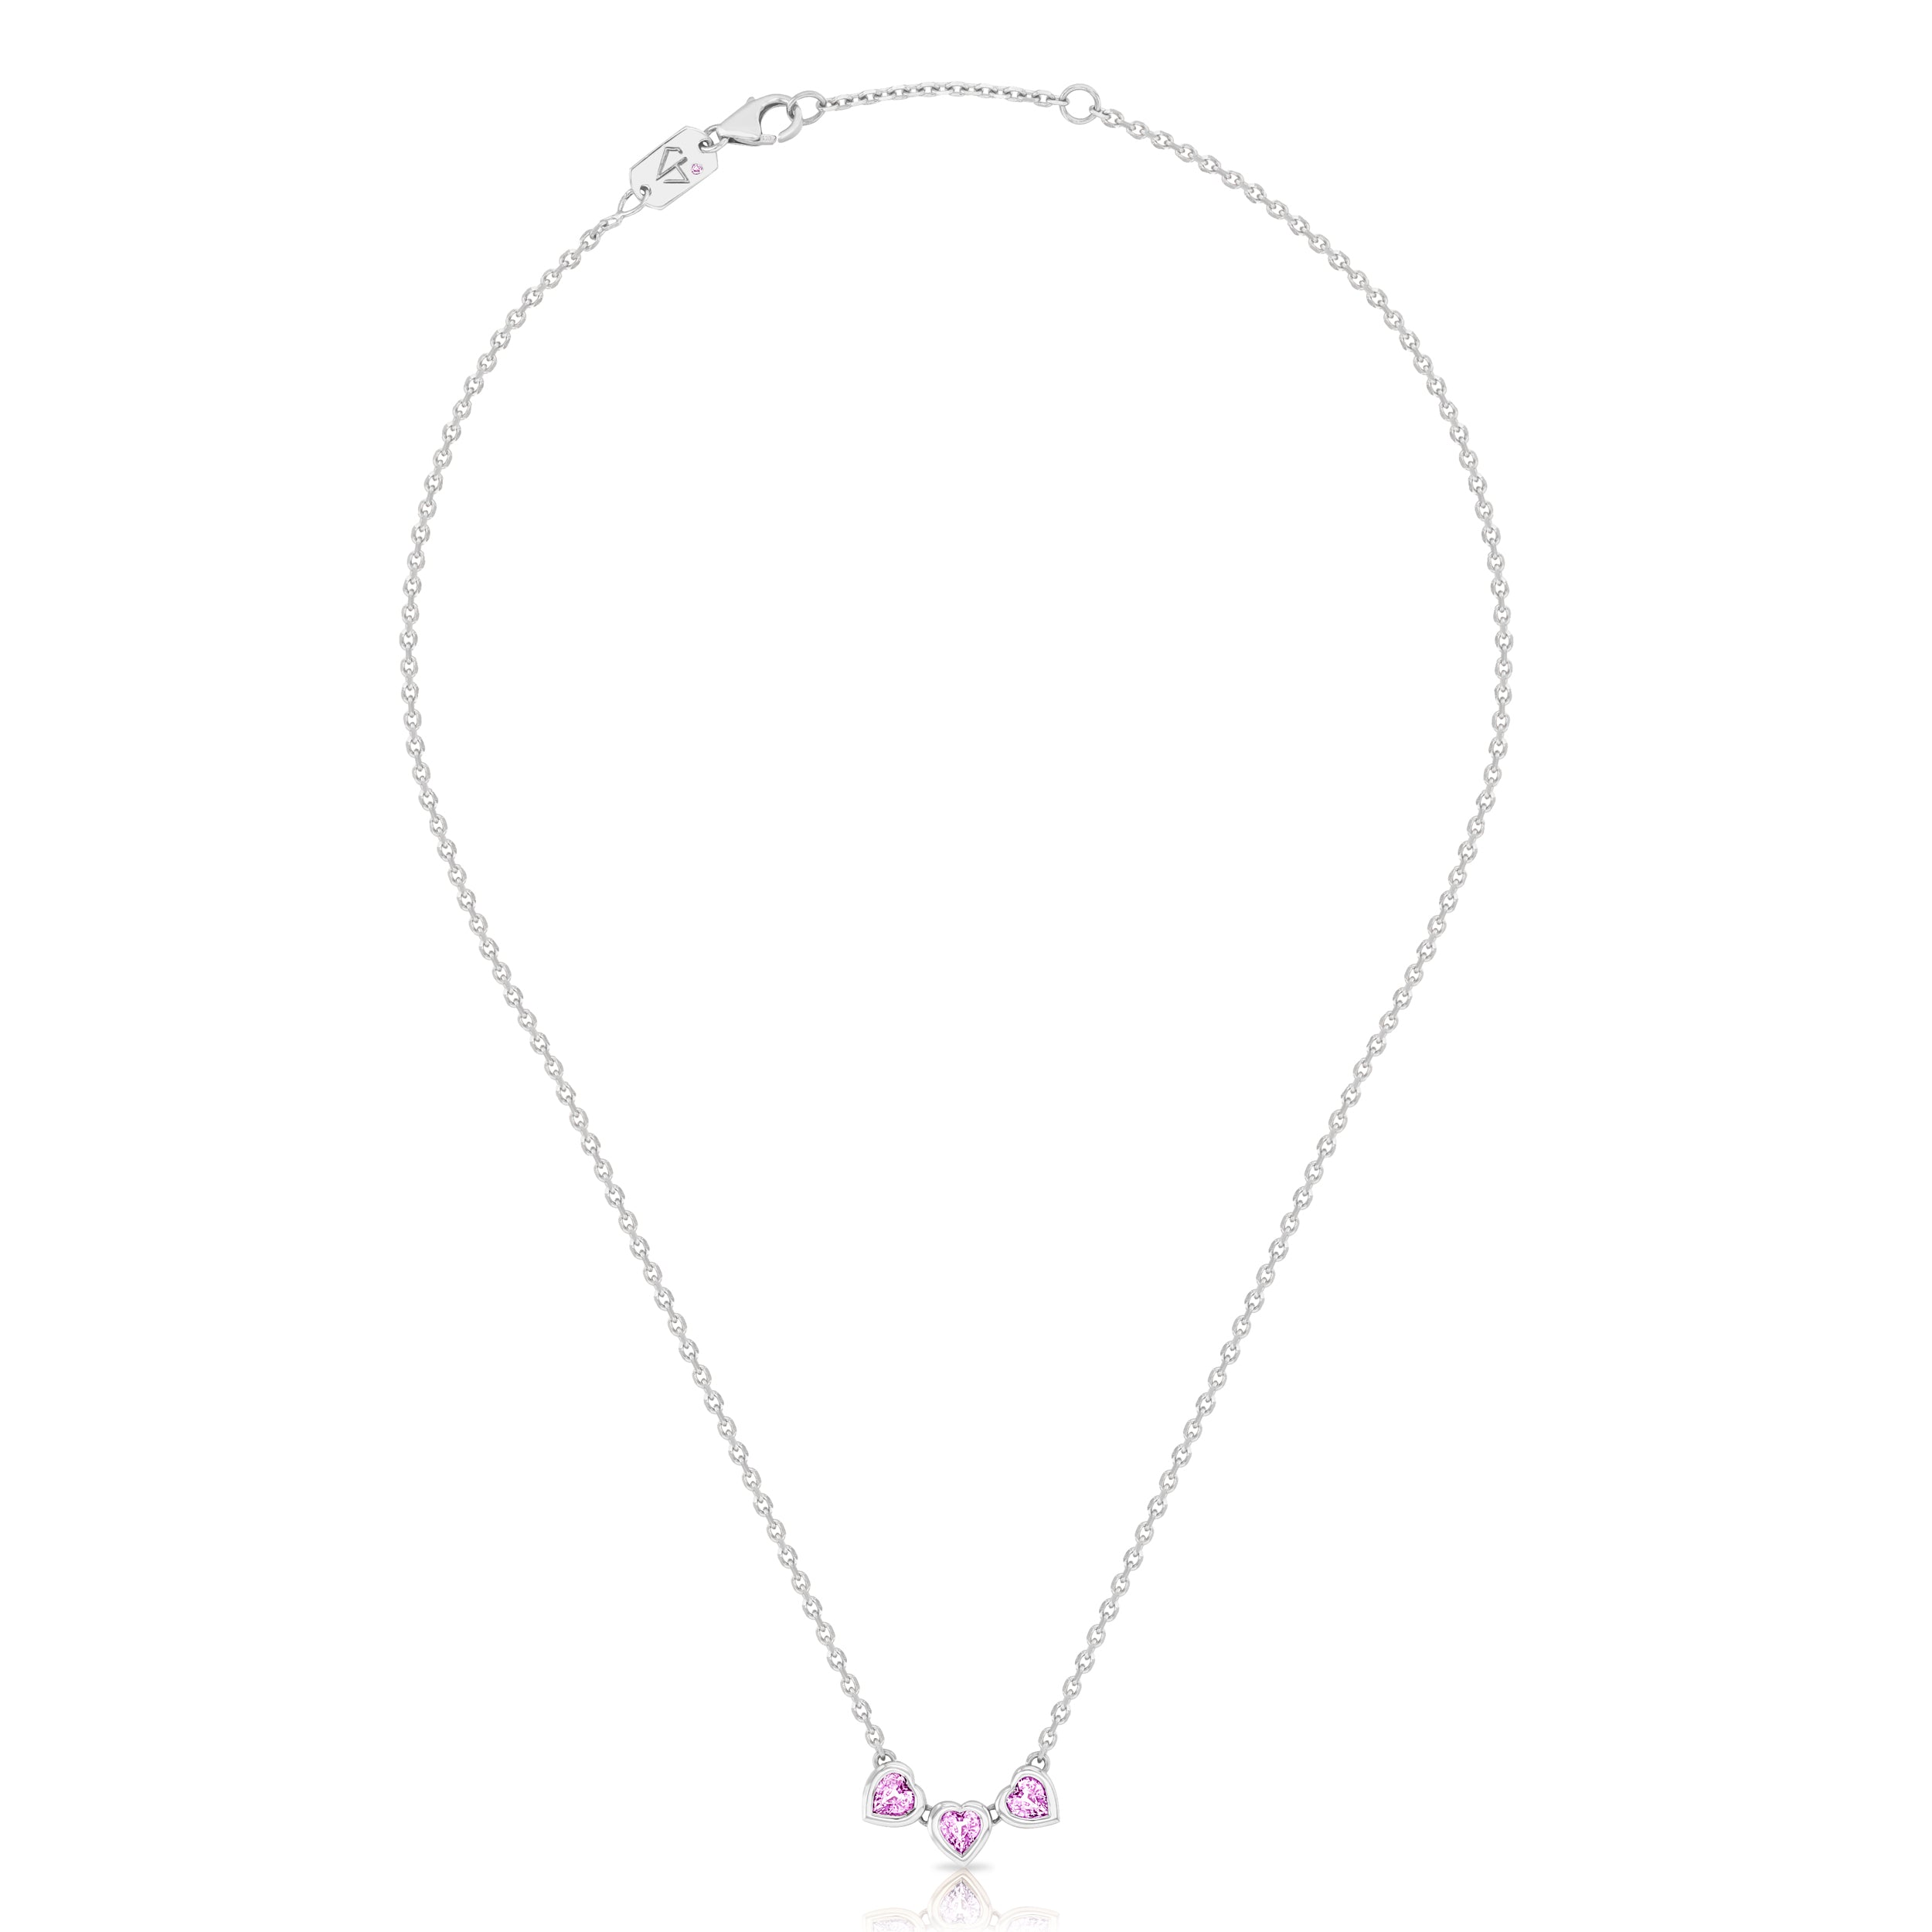 Pink Sapphire Trio Heart Necklace